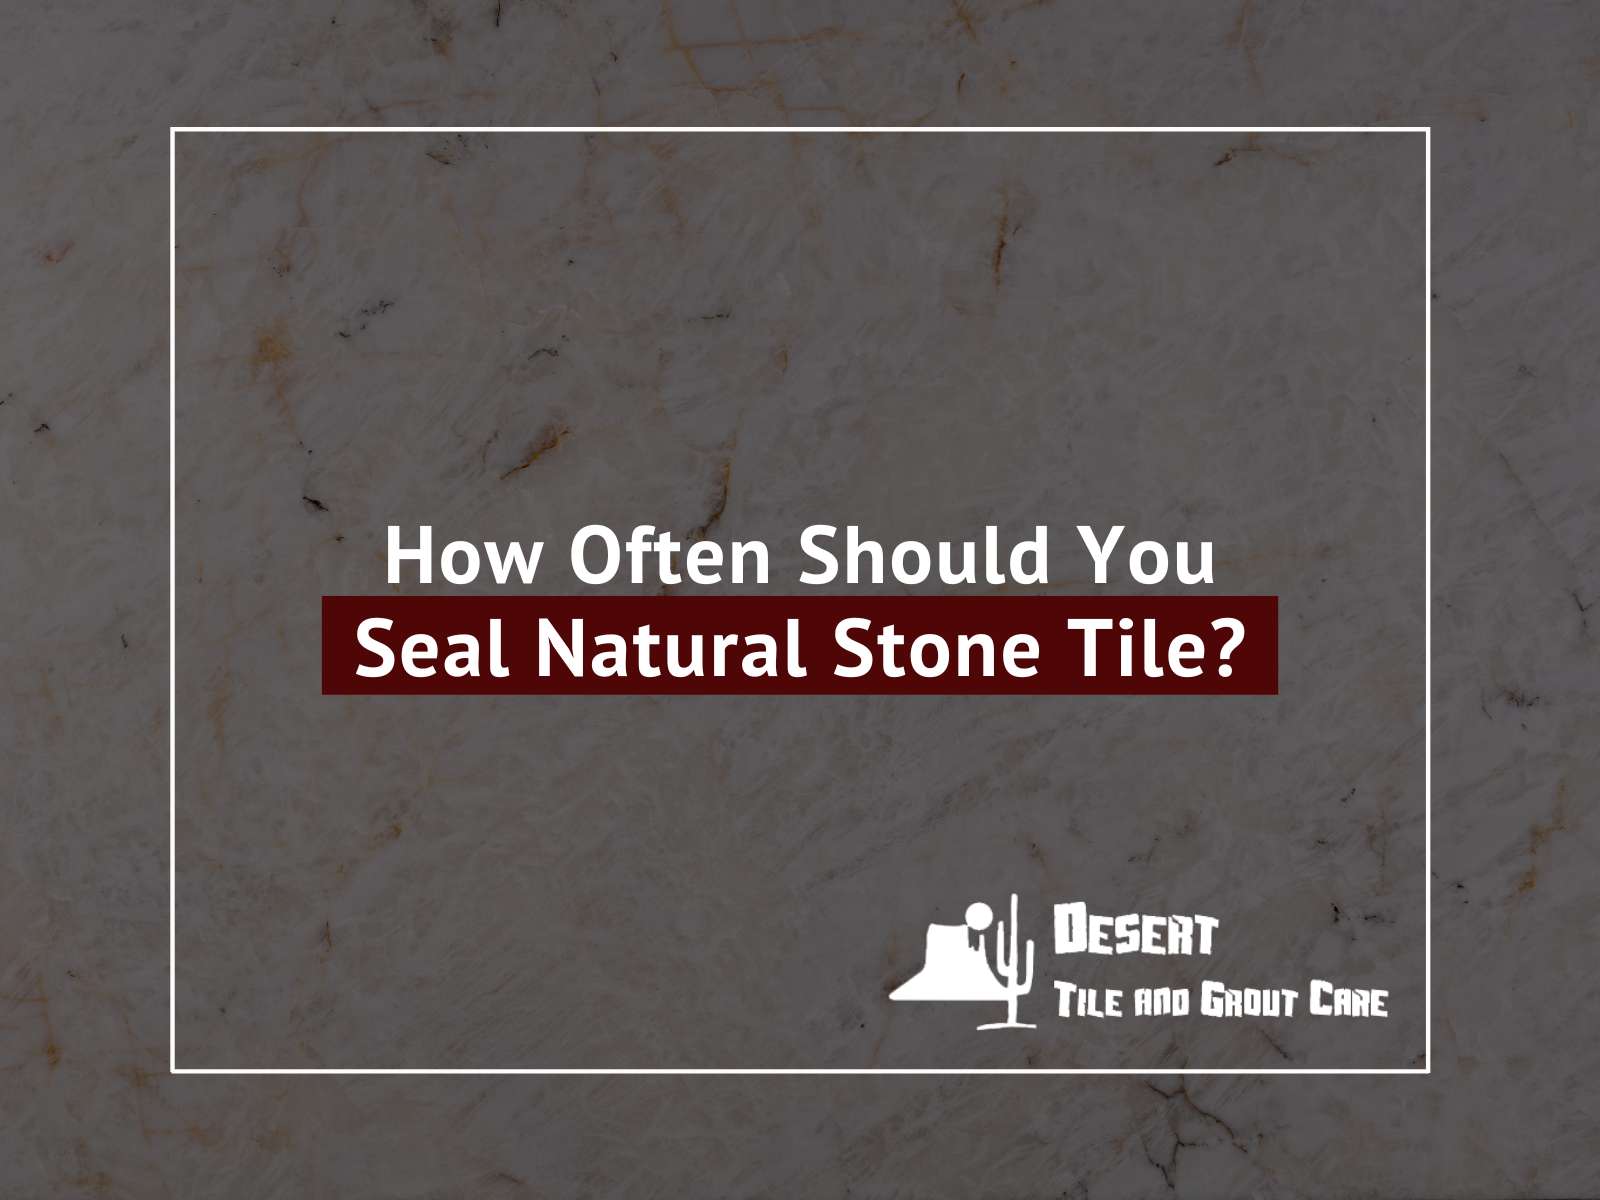 How Often Should You Seal Natural Stone Tile